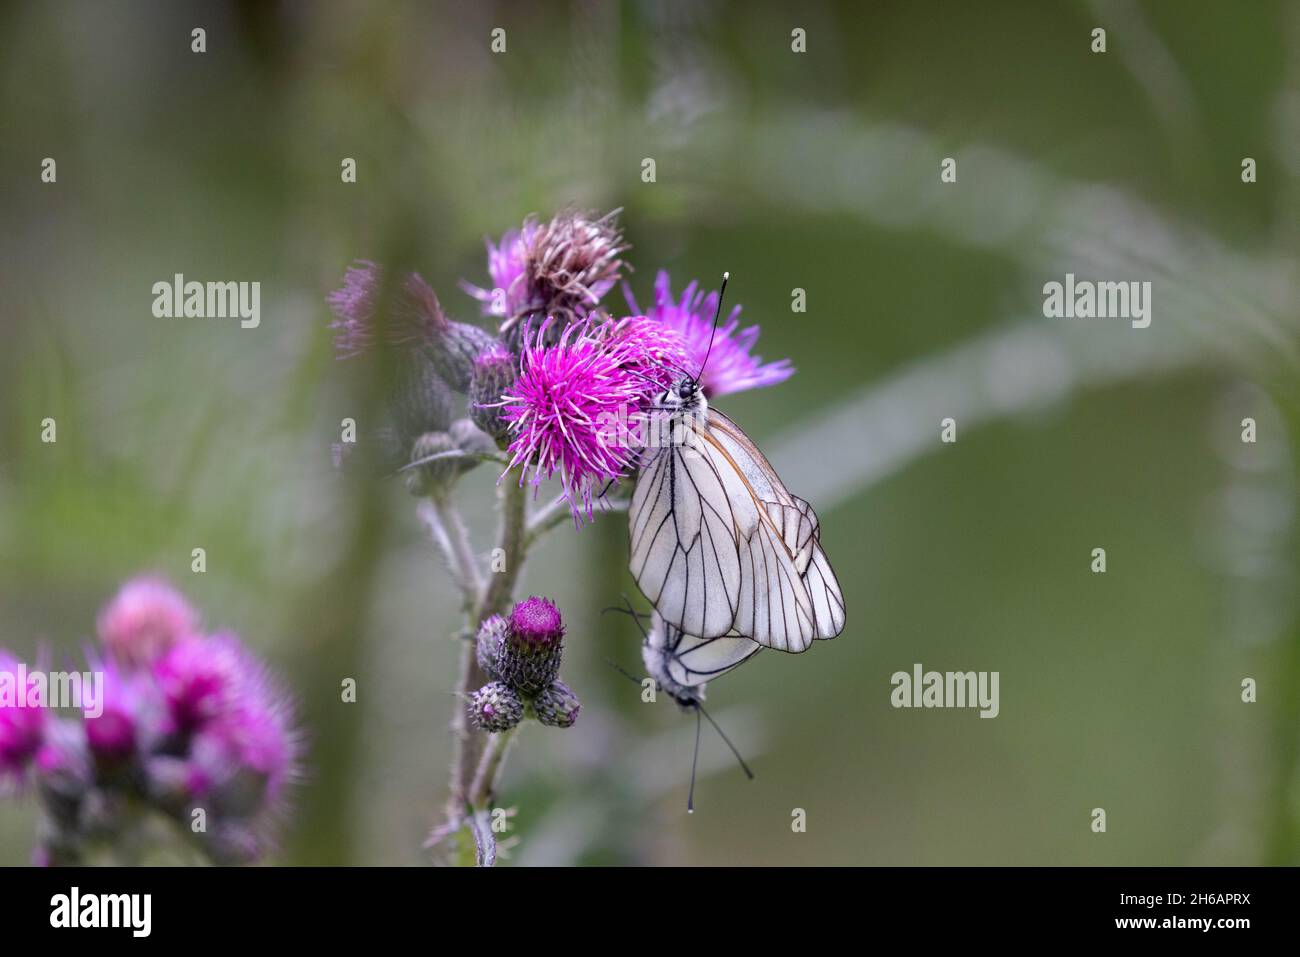 Aporia crataegi, the black-veined white butterfly on thistle, mating Stock Photo